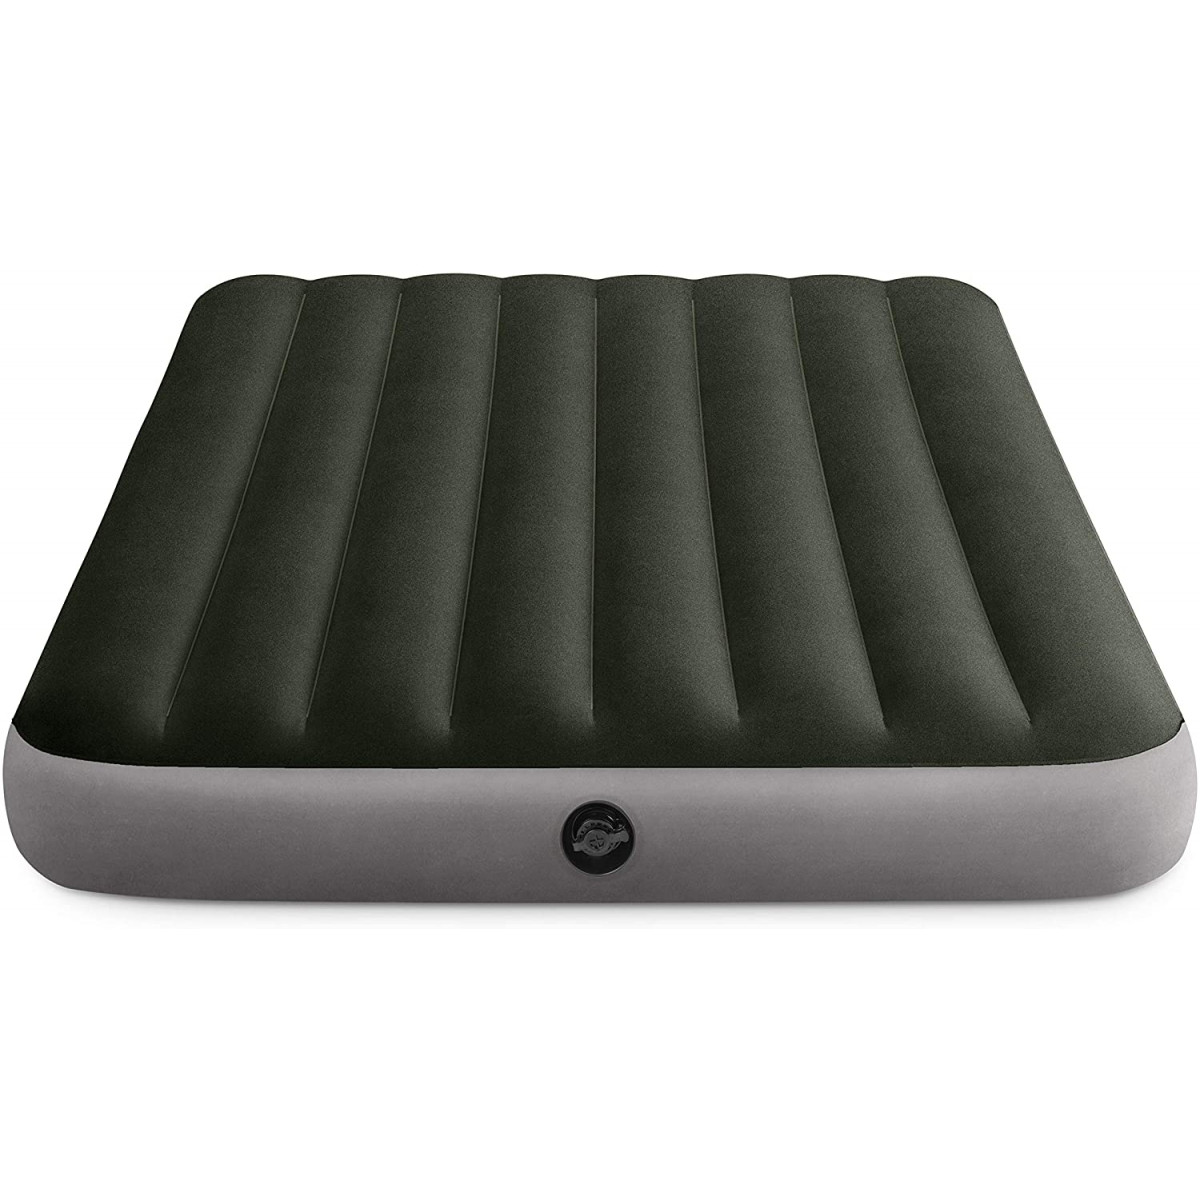 https://www.decomania.fr/700858-product_hd/matelas-gonflable-prestige-downy-2-personnes.jpg